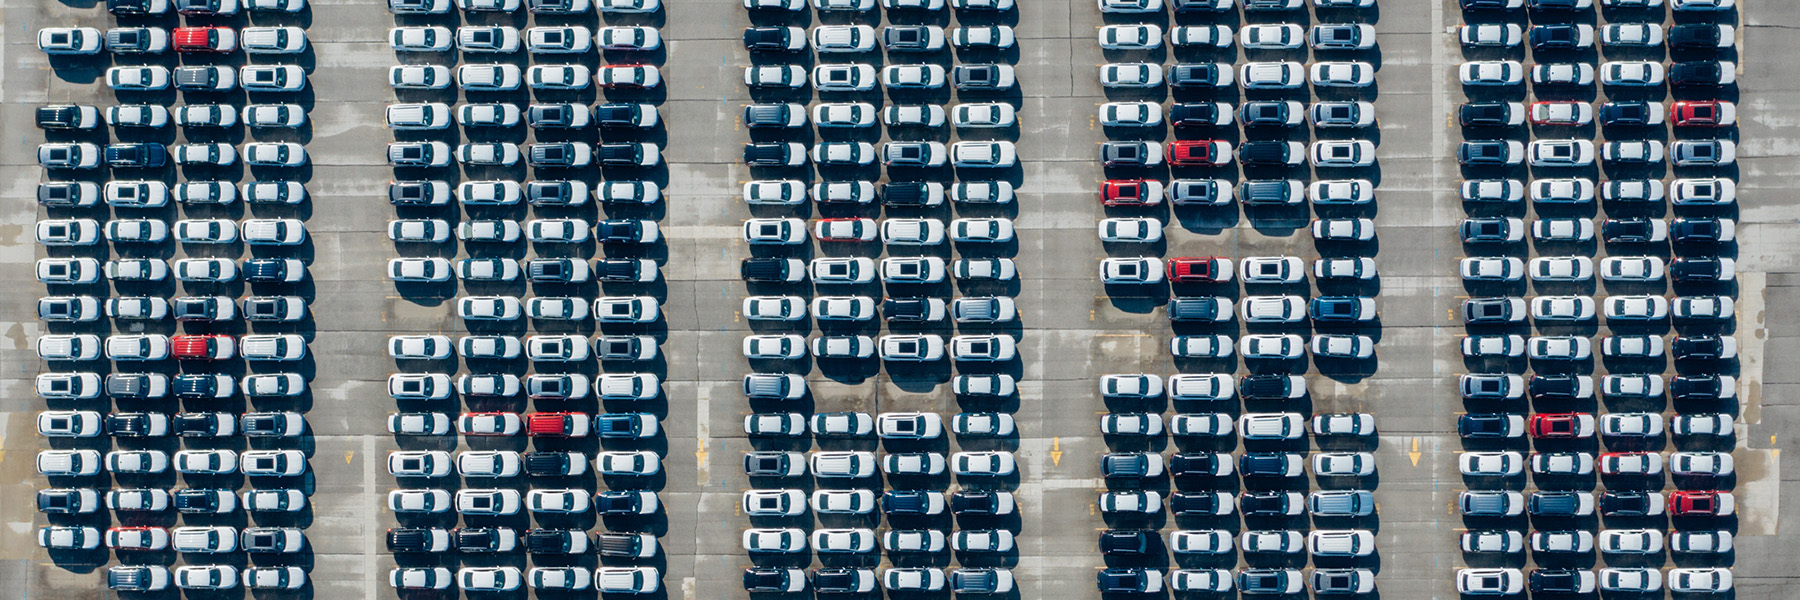 YFile featured image by Photo by Kelly L from Pexels shows a parking lot